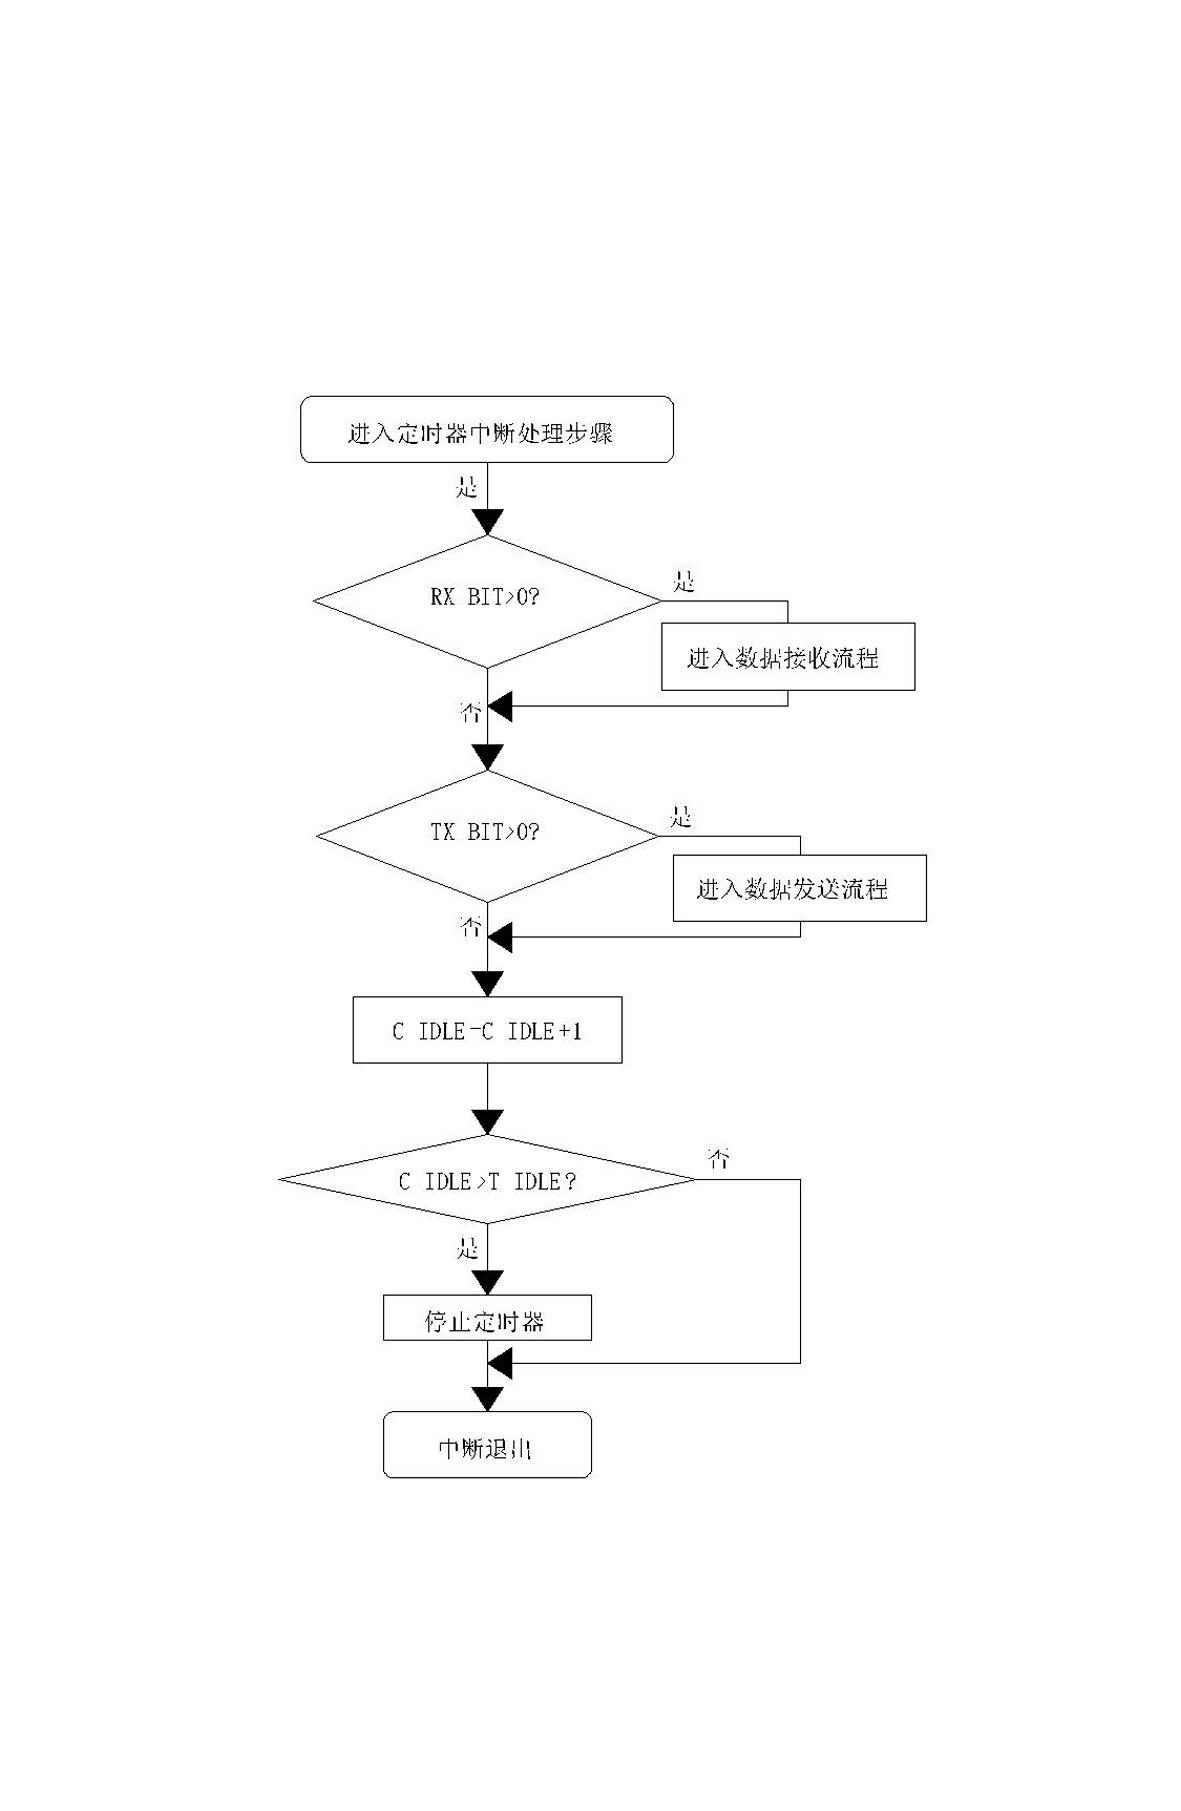 Method for achieving UART (universal asynchronous receiver/transmitter) communication interfaces through software simulation